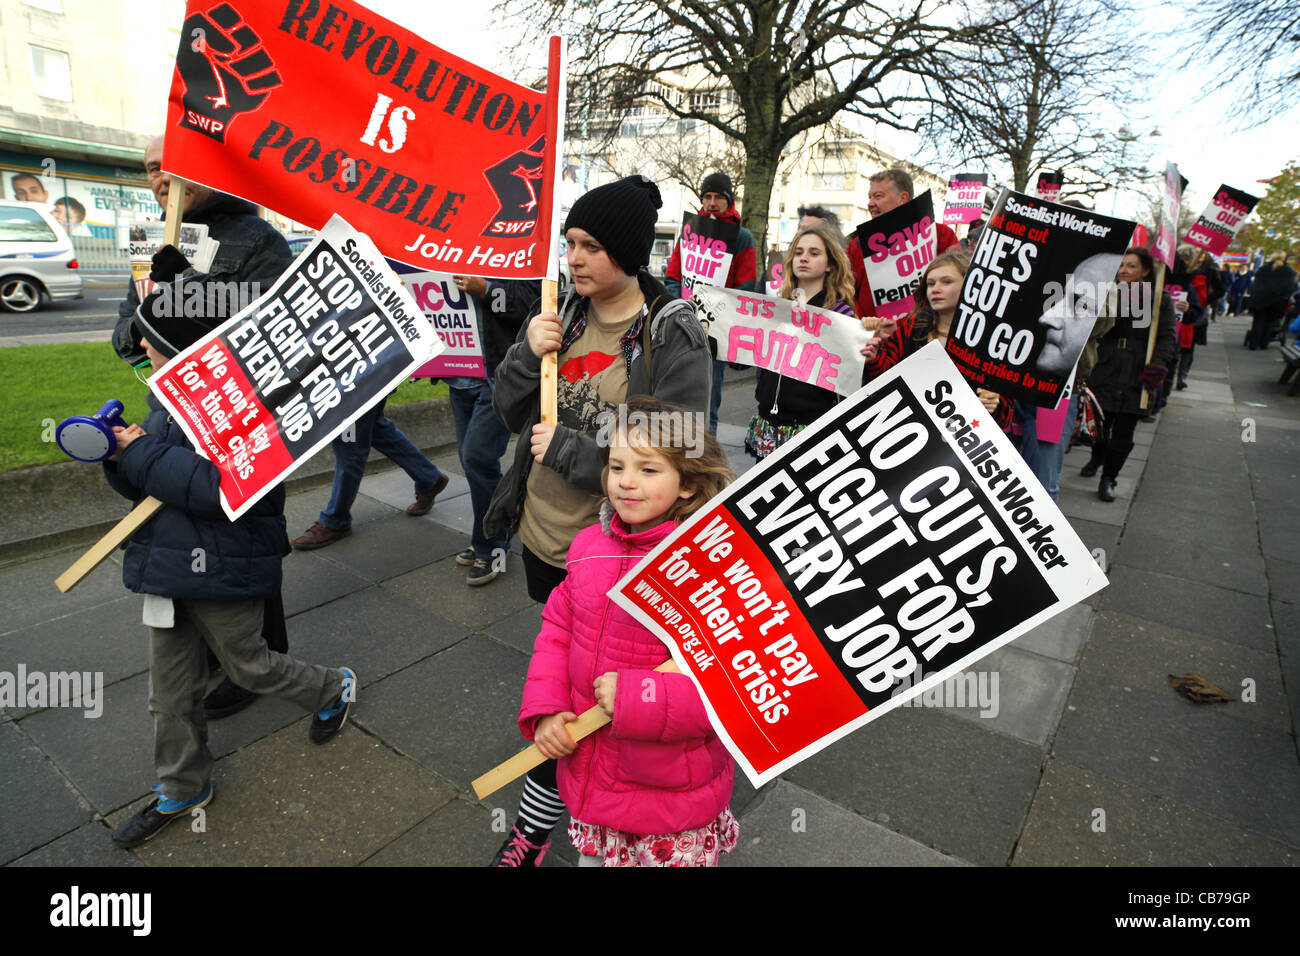 Public sector workers national strike rally in Plymouth in Devon, UK. Stock Photo